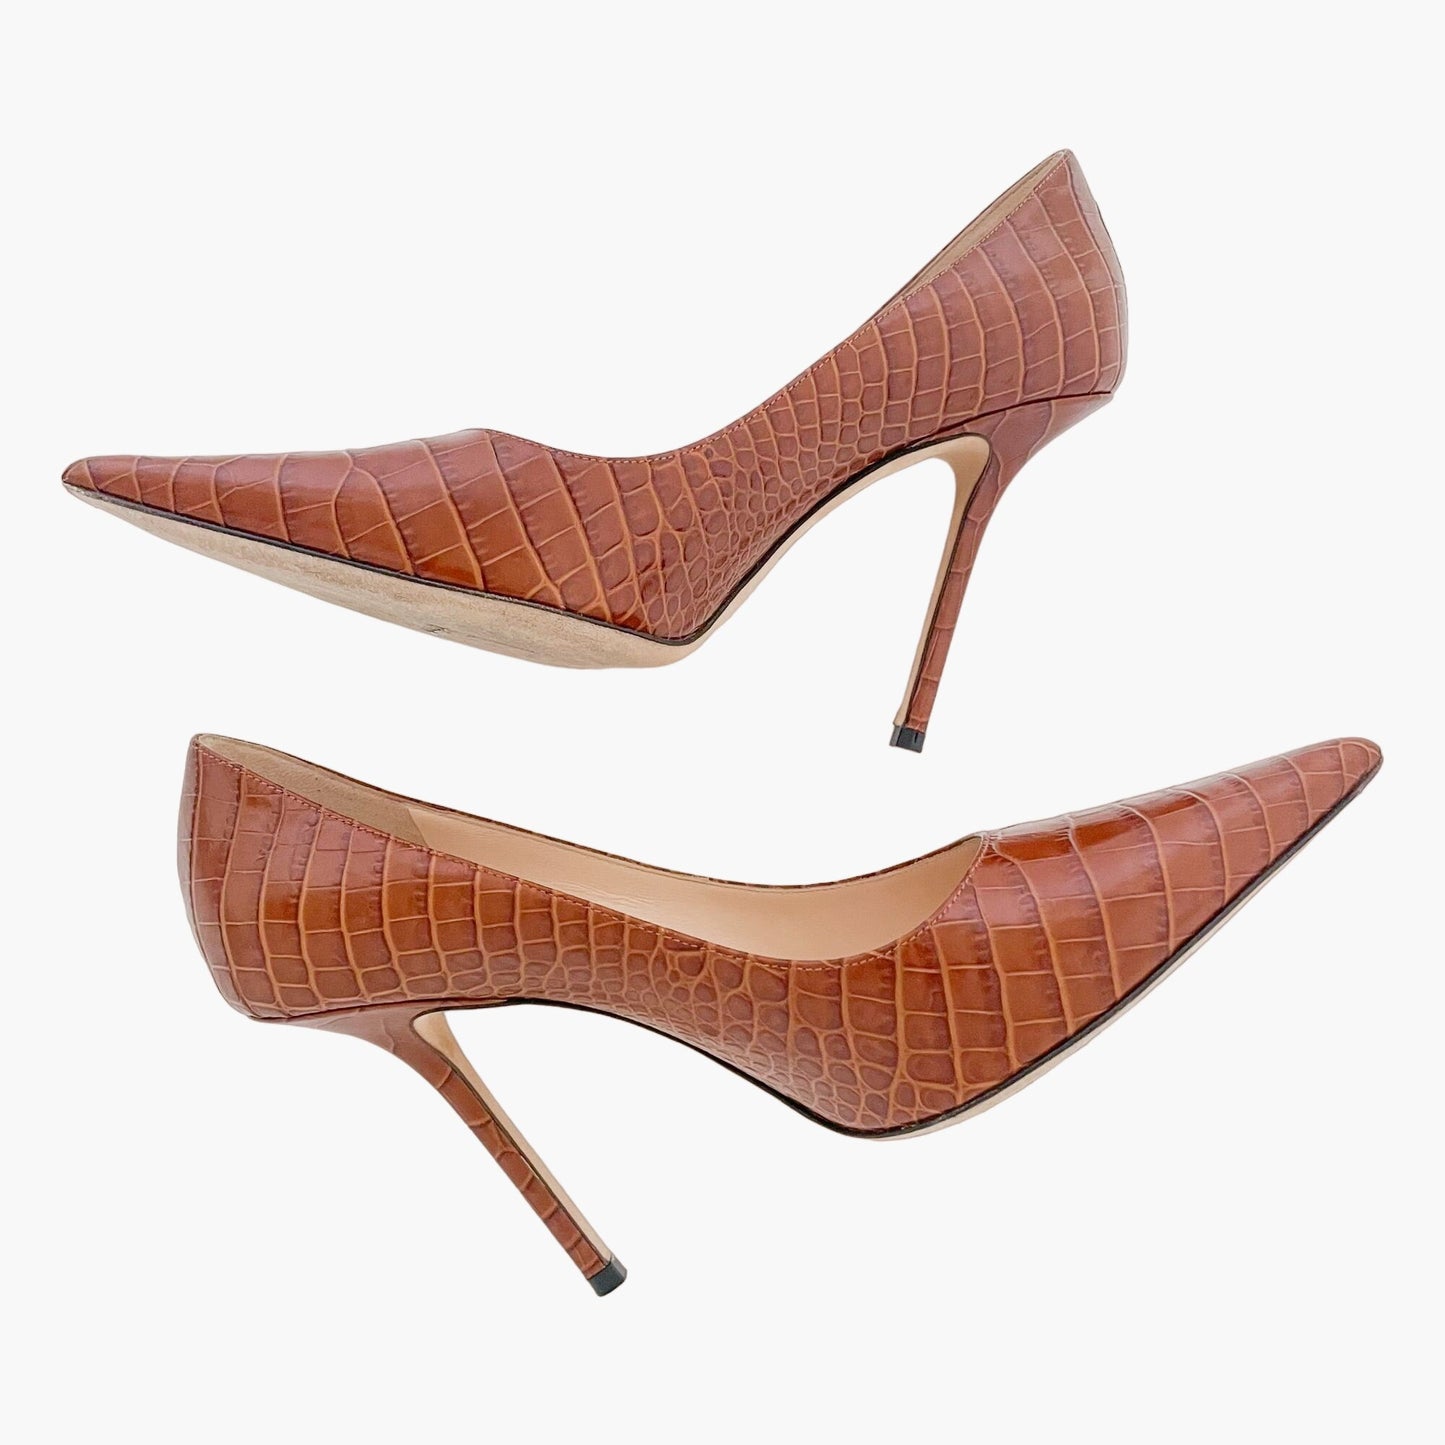 Jimmy Choo Love 100 Pumps in Cuoio (Brown) Croc Embossed Leather Size 39